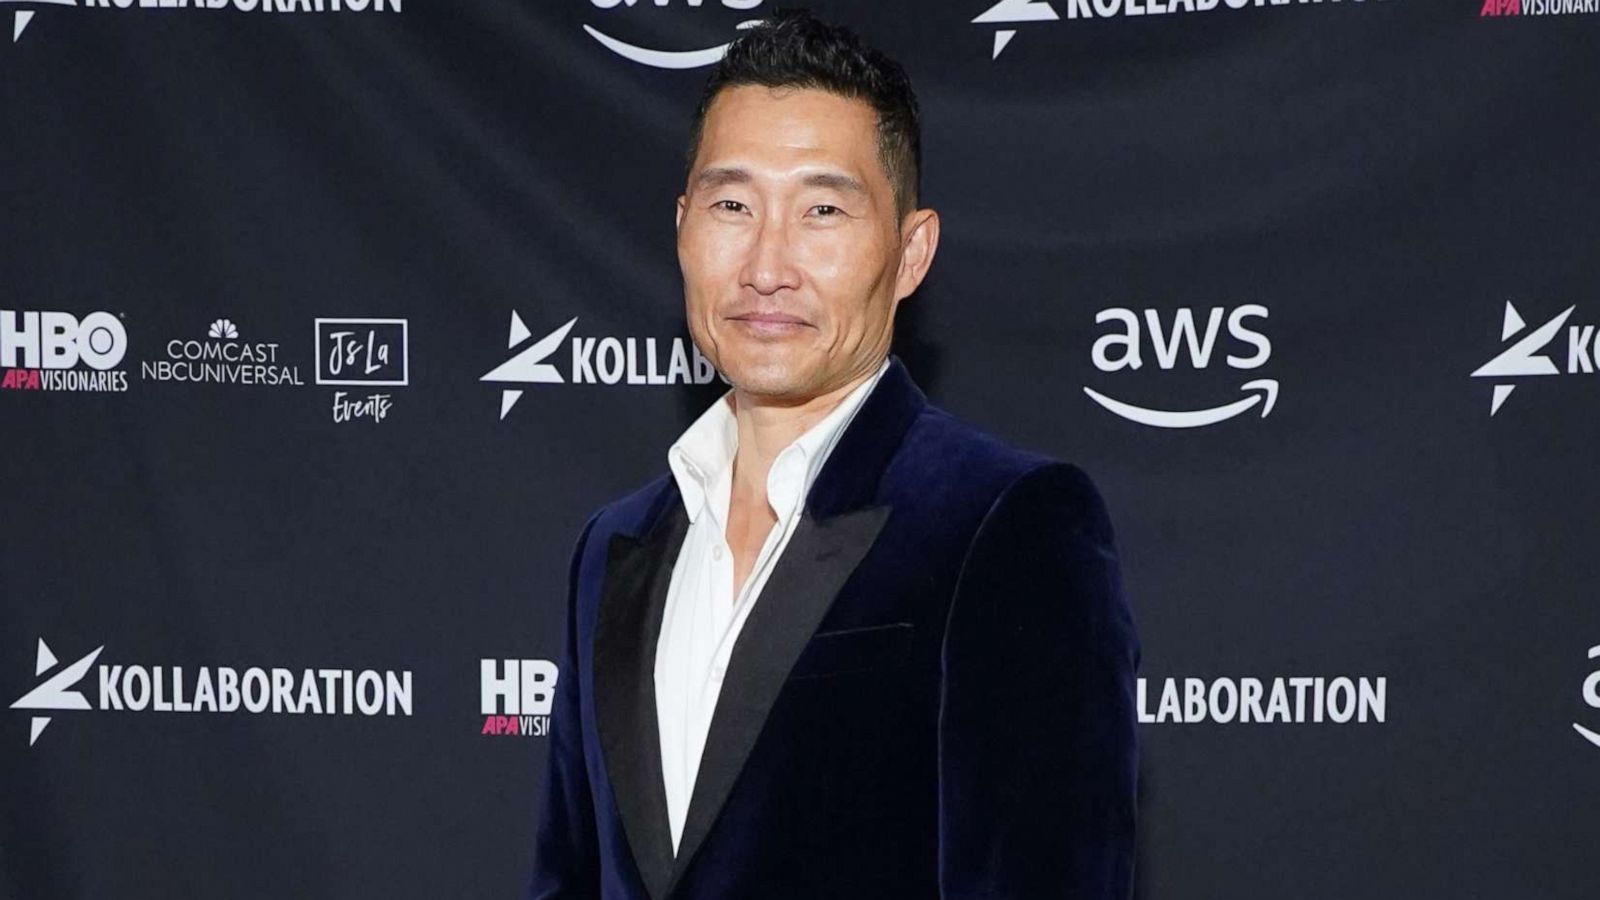 Daniel Dae Kim says he unnerves some when boarding plane thanks to Lost,  narrates an incident - Hindustan Times